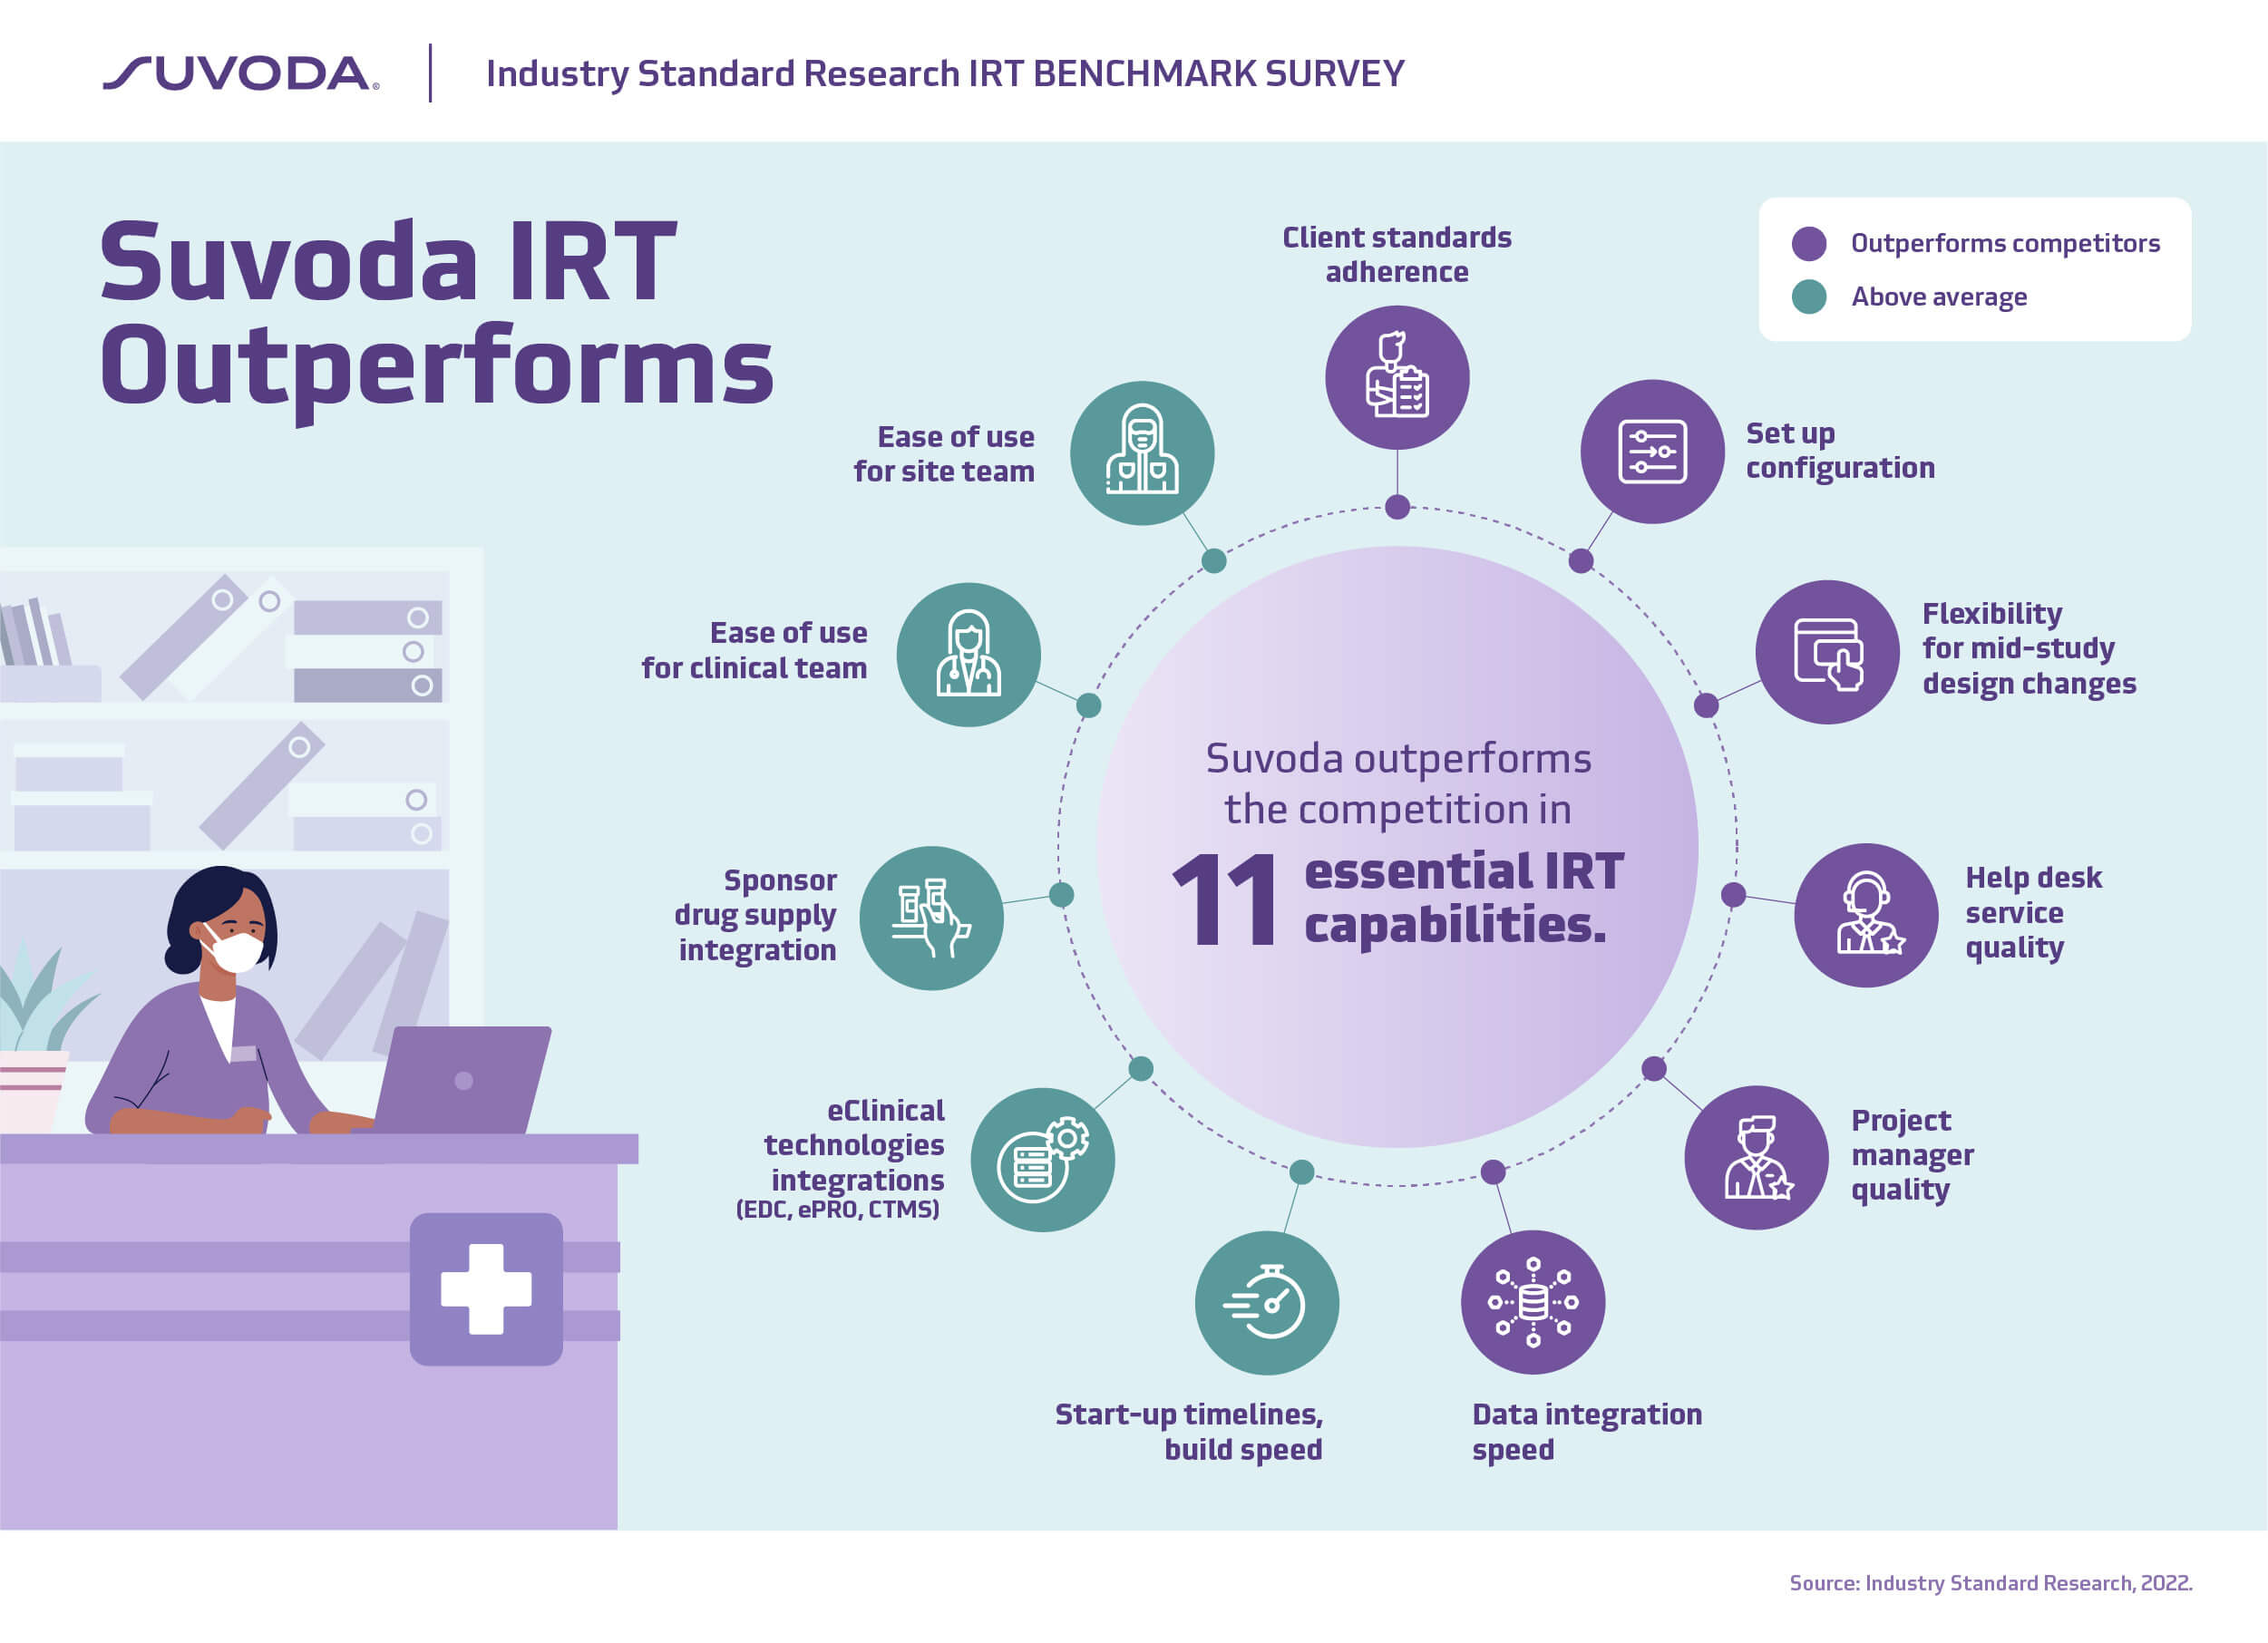 Infographic: Suvoda IRT Outperforms in ISR benchmark survey